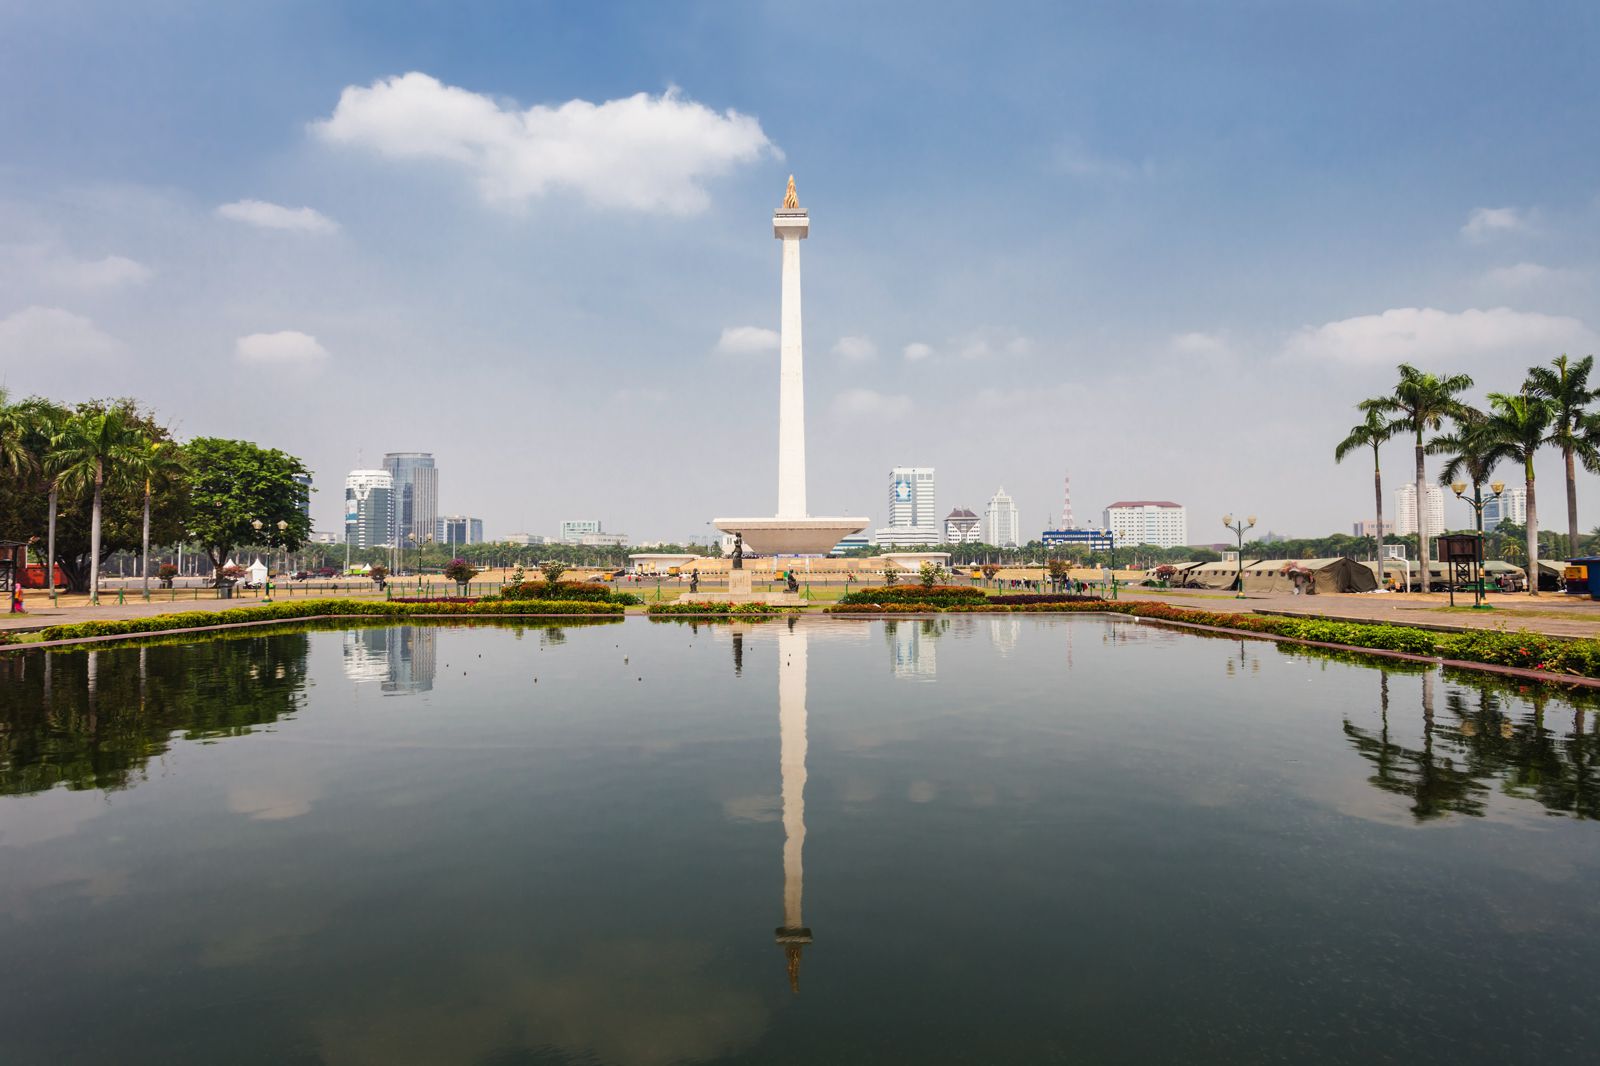 10 Places You Have To Visit In Jakarta Indonesia Hand Luggage Only